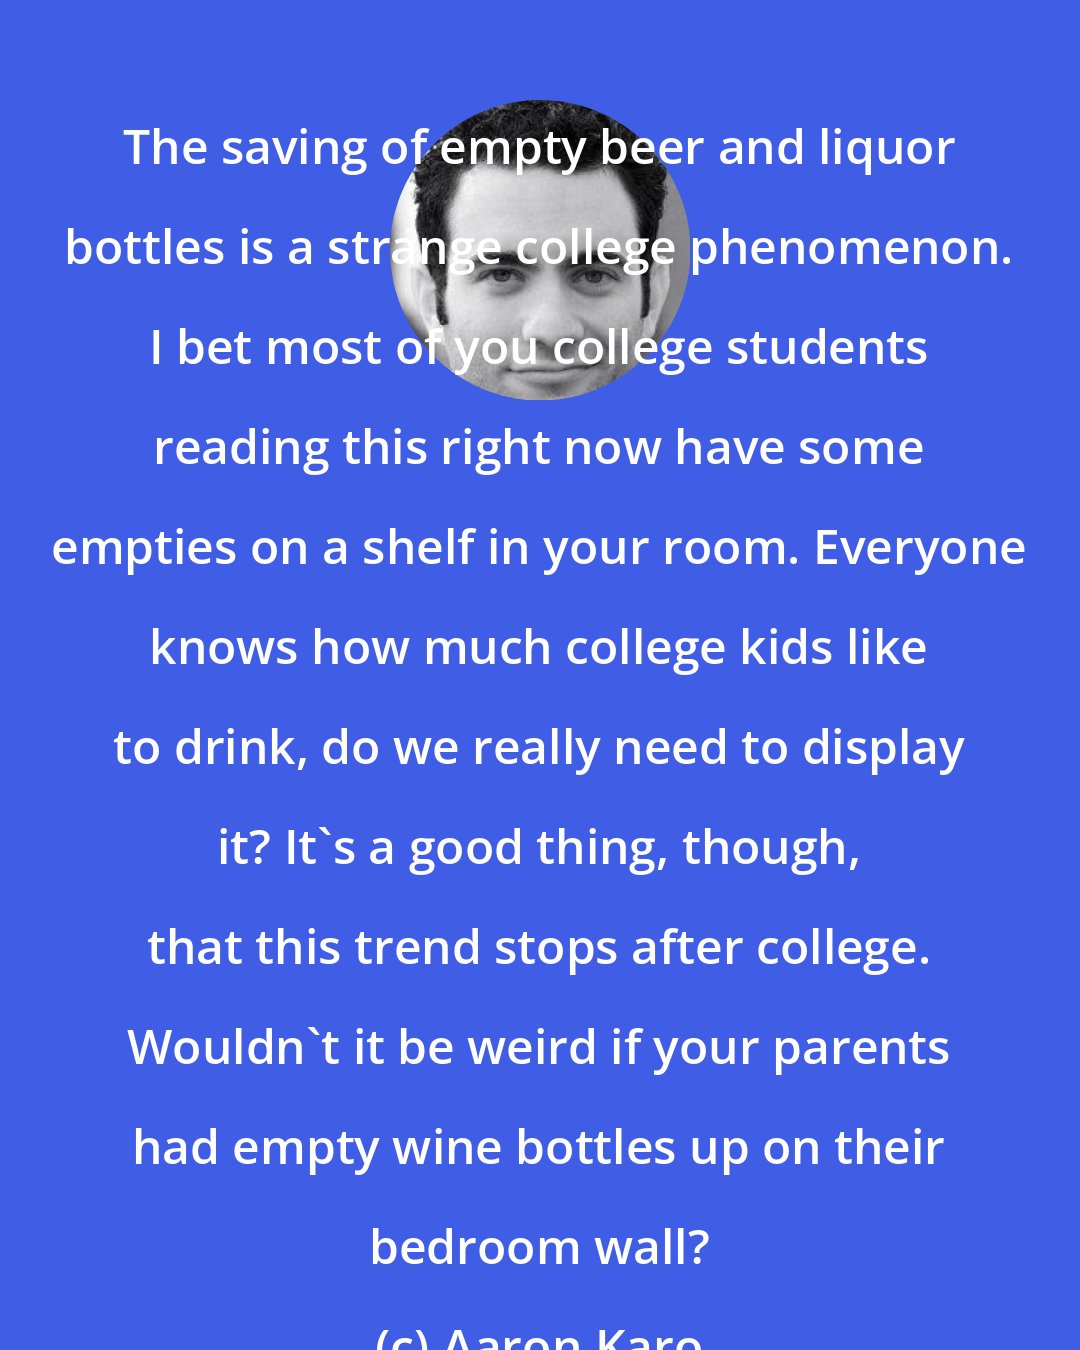 Aaron Karo: The saving of empty beer and liquor bottles is a strange college phenomenon. I bet most of you college students reading this right now have some empties on a shelf in your room. Everyone knows how much college kids like to drink, do we really need to display it? It's a good thing, though, that this trend stops after college. Wouldn't it be weird if your parents had empty wine bottles up on their bedroom wall?